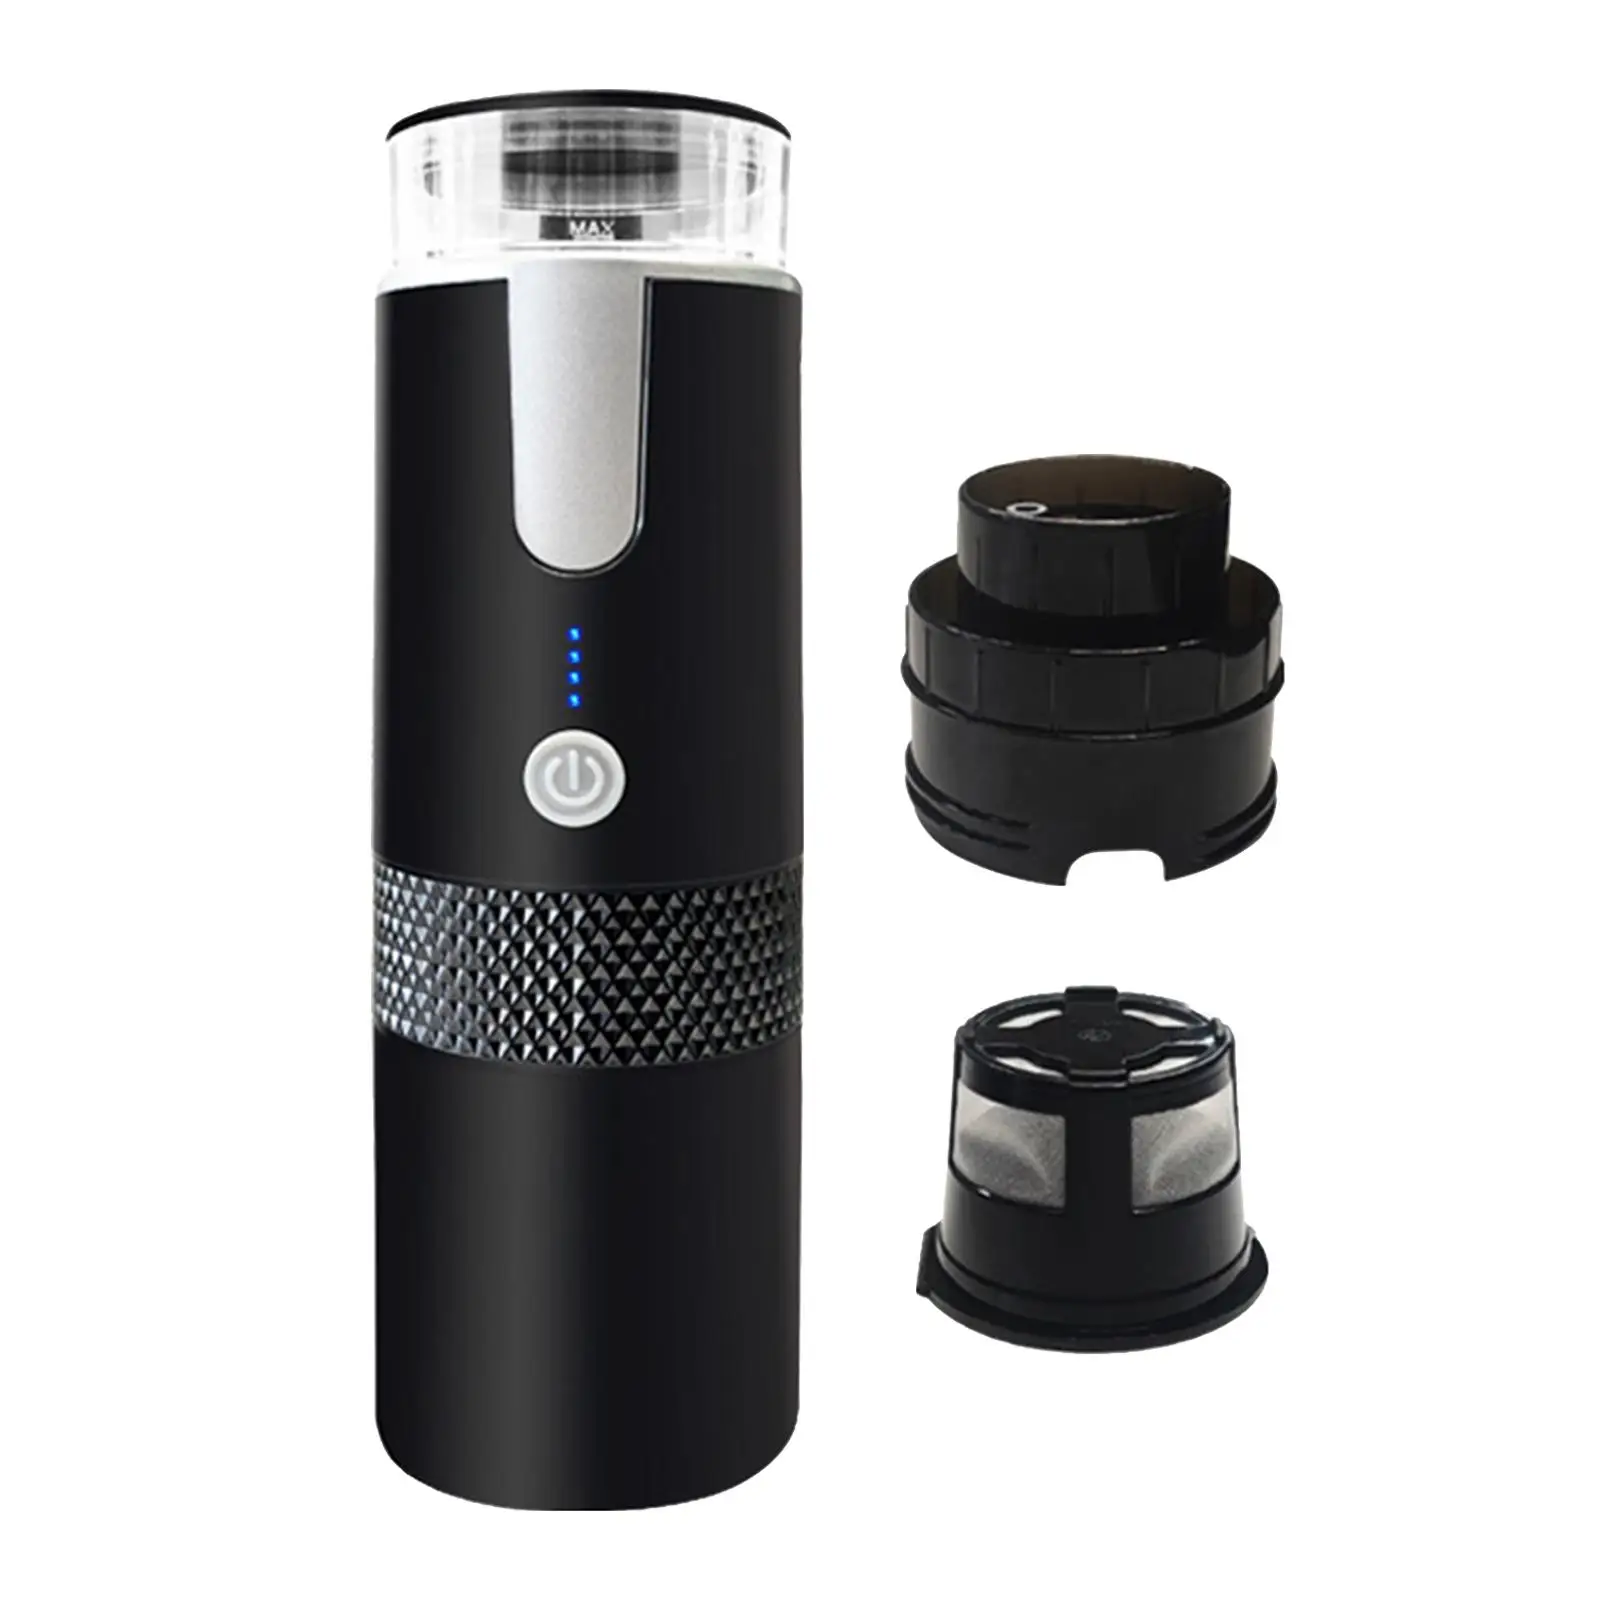 Coffee Machine Rechargeable Electric Coffee Maker Mini USB Electric Coffee Maker Machine for Camping Backpacking Travel